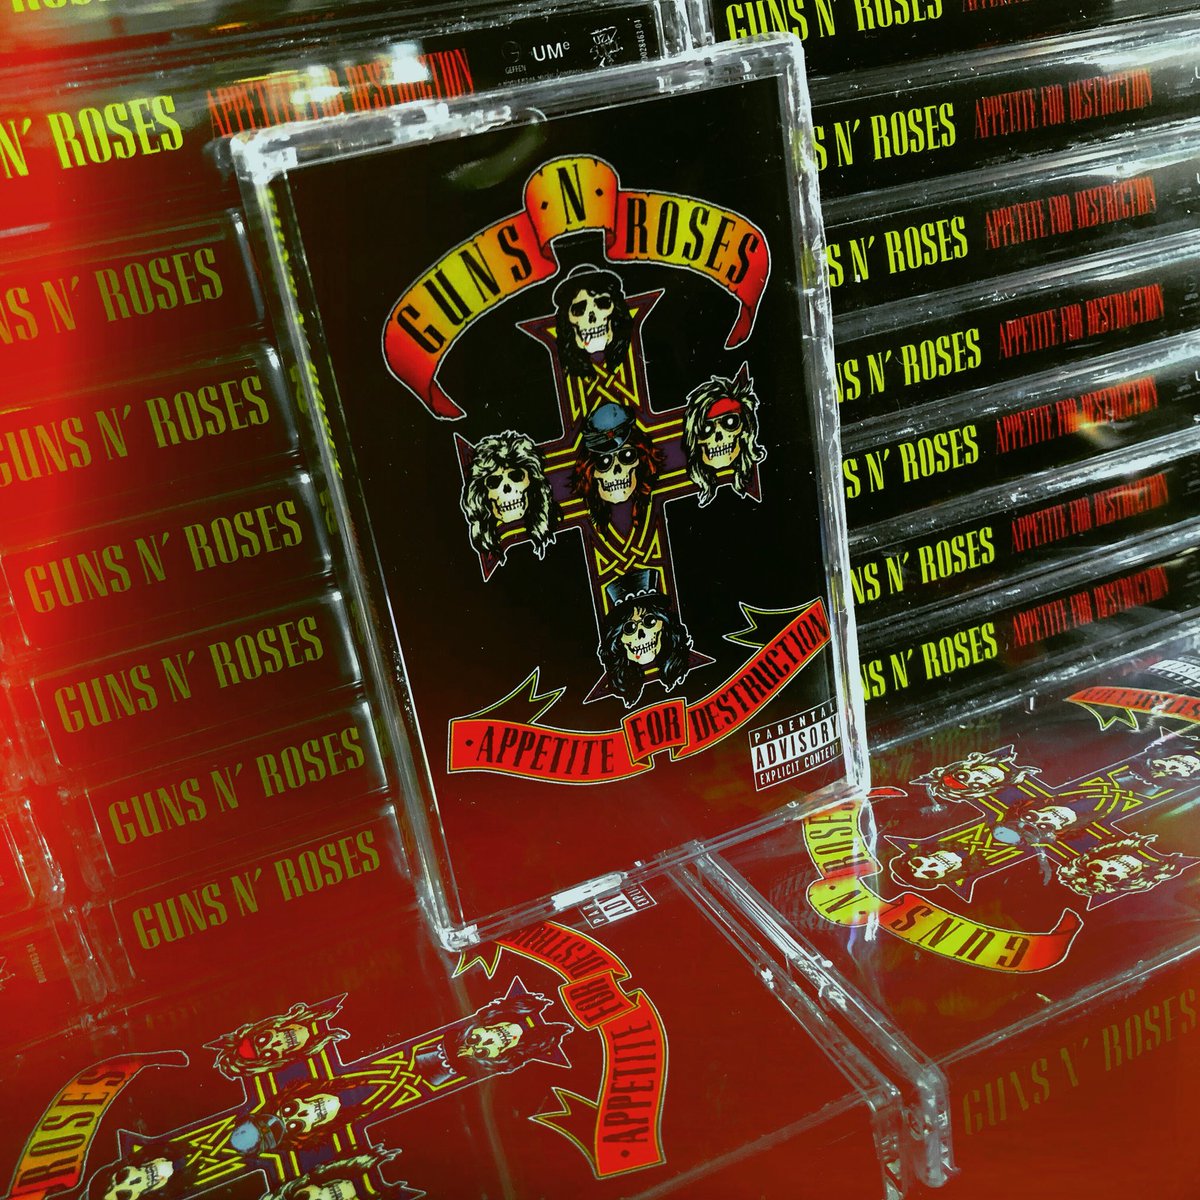 Guns N' Roses on Twitter: "Los Angeles! The first 10 Nightrain members with fan club shirt and lanyard at the old Tower Records location on Sunset Blvd will get a rare